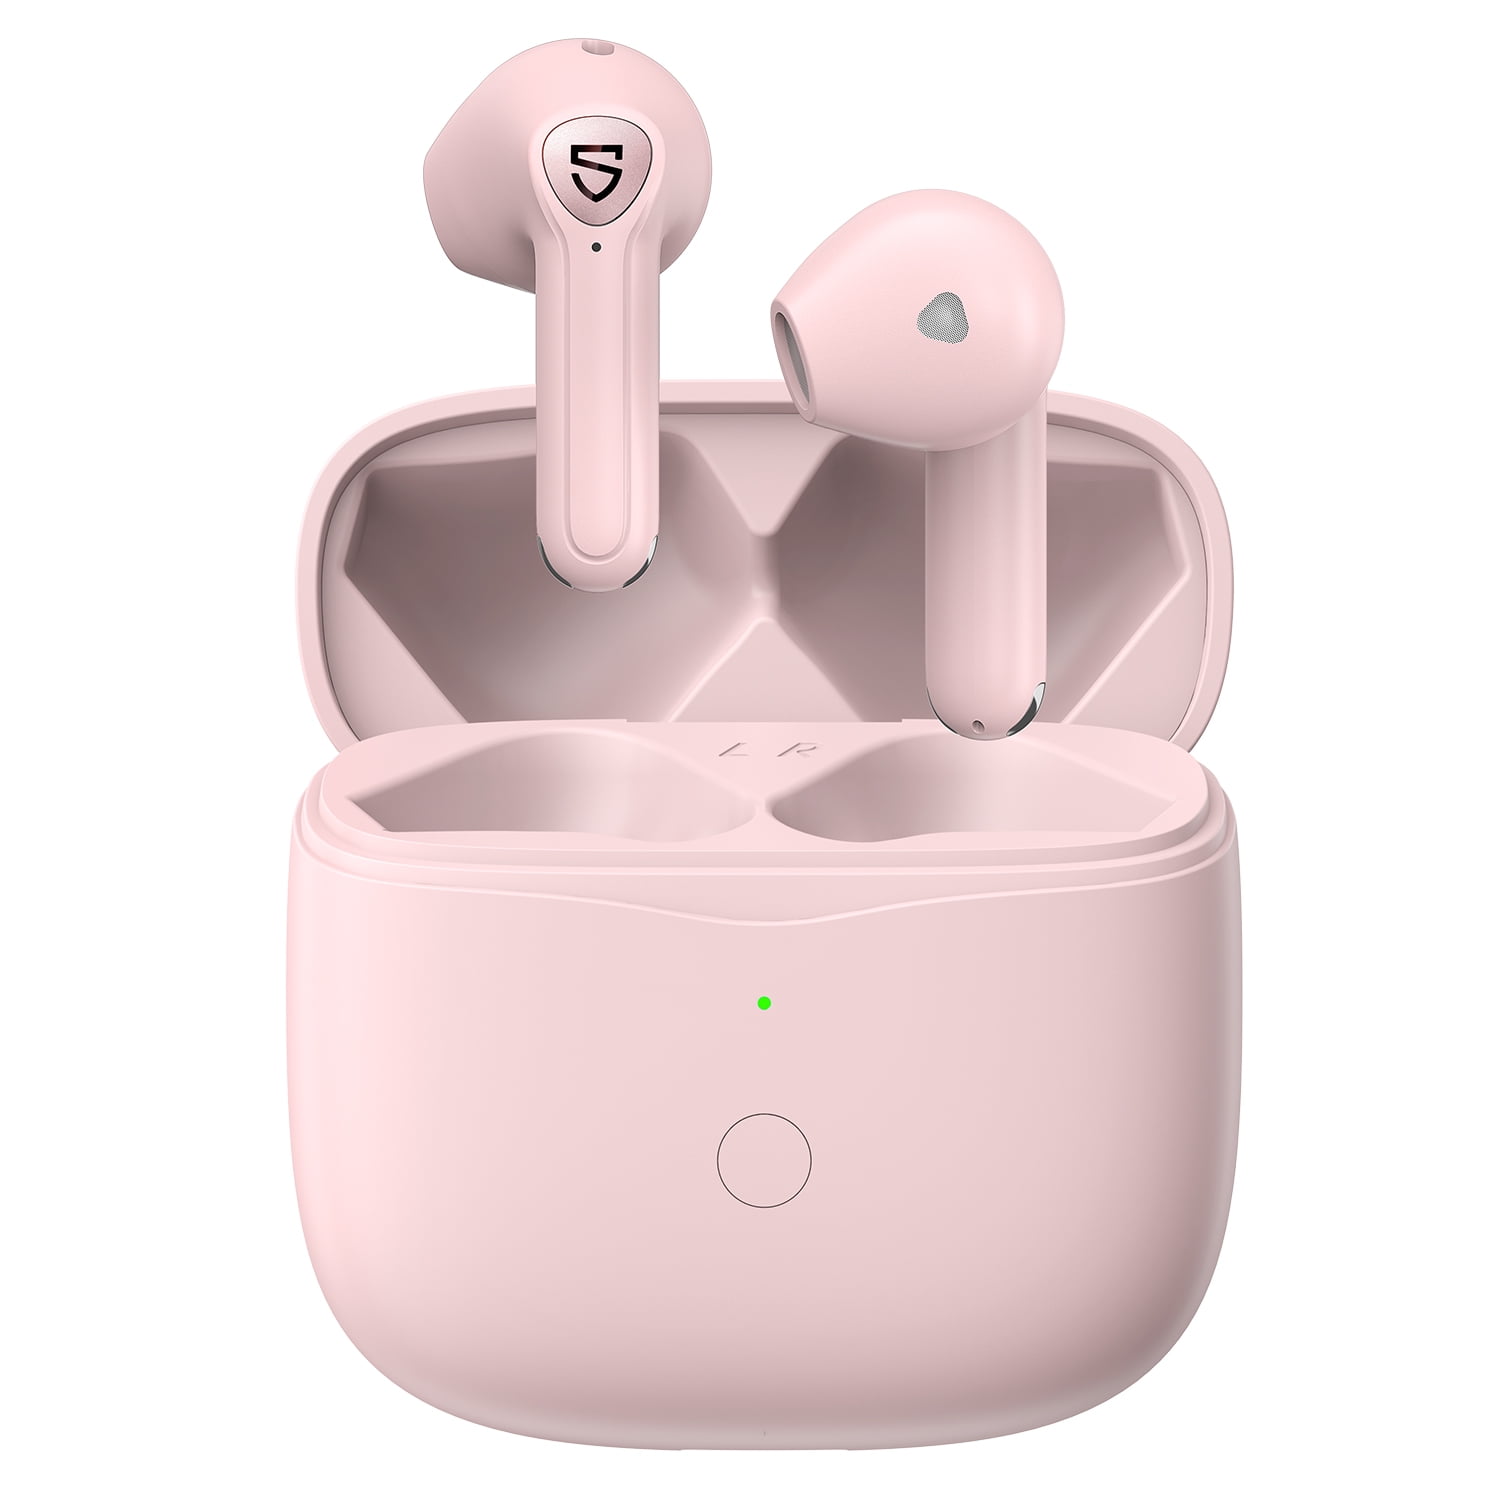 Authentic Apple Earpods Original Headset Dual Earbuds 3.5mm Earphones Z9M  Compatible With Samsung Galaxy S10e S10+ S10 (S10 Plus) 